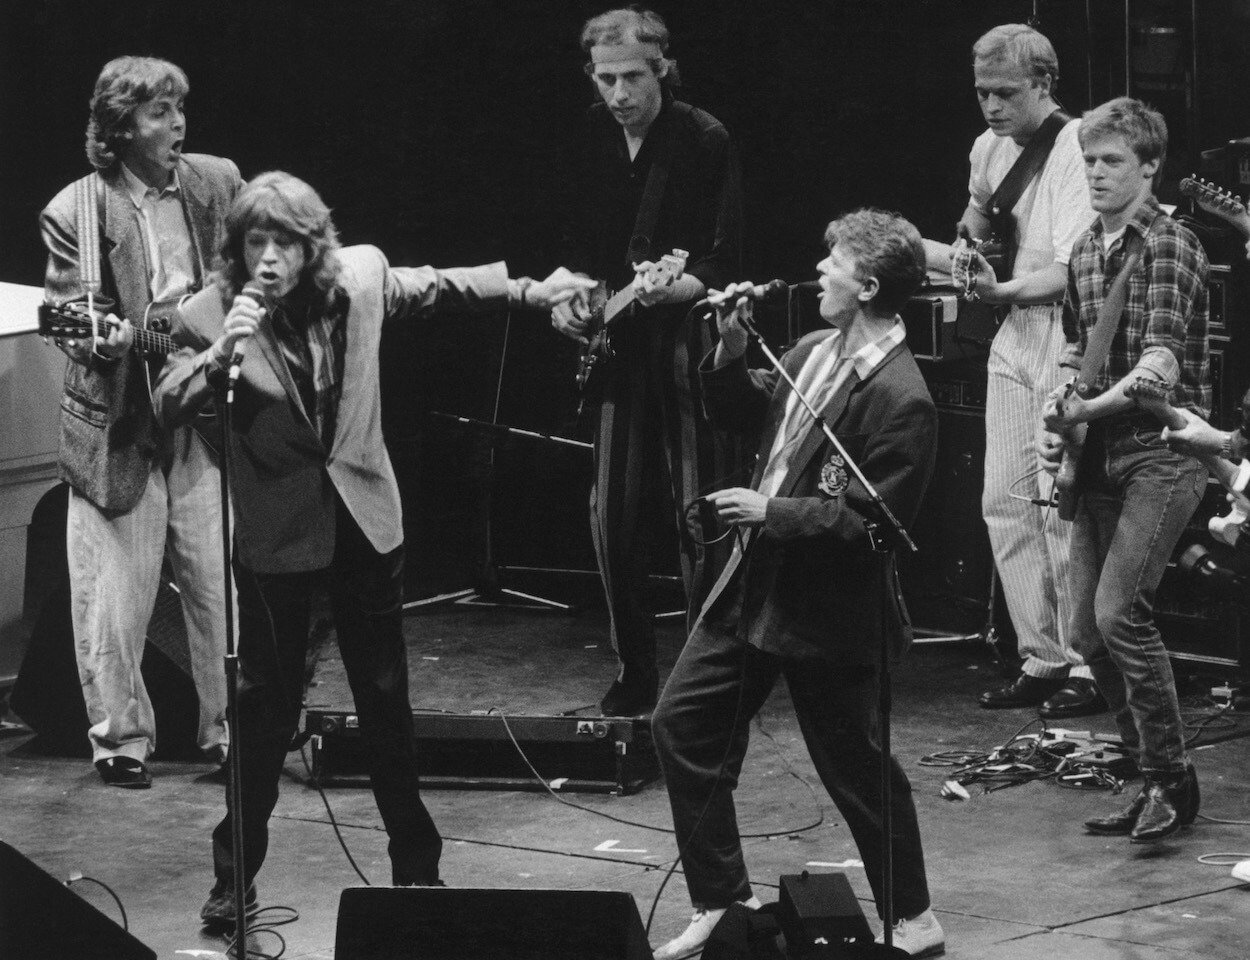 Beatles bassist Paul McCartney (from left), Rolling Stones singer Mick Jagger, Dire Straits guitarist Mark Knopfler, and David Bowie, among others, perform at the Prince's Trust Concert in 1986.